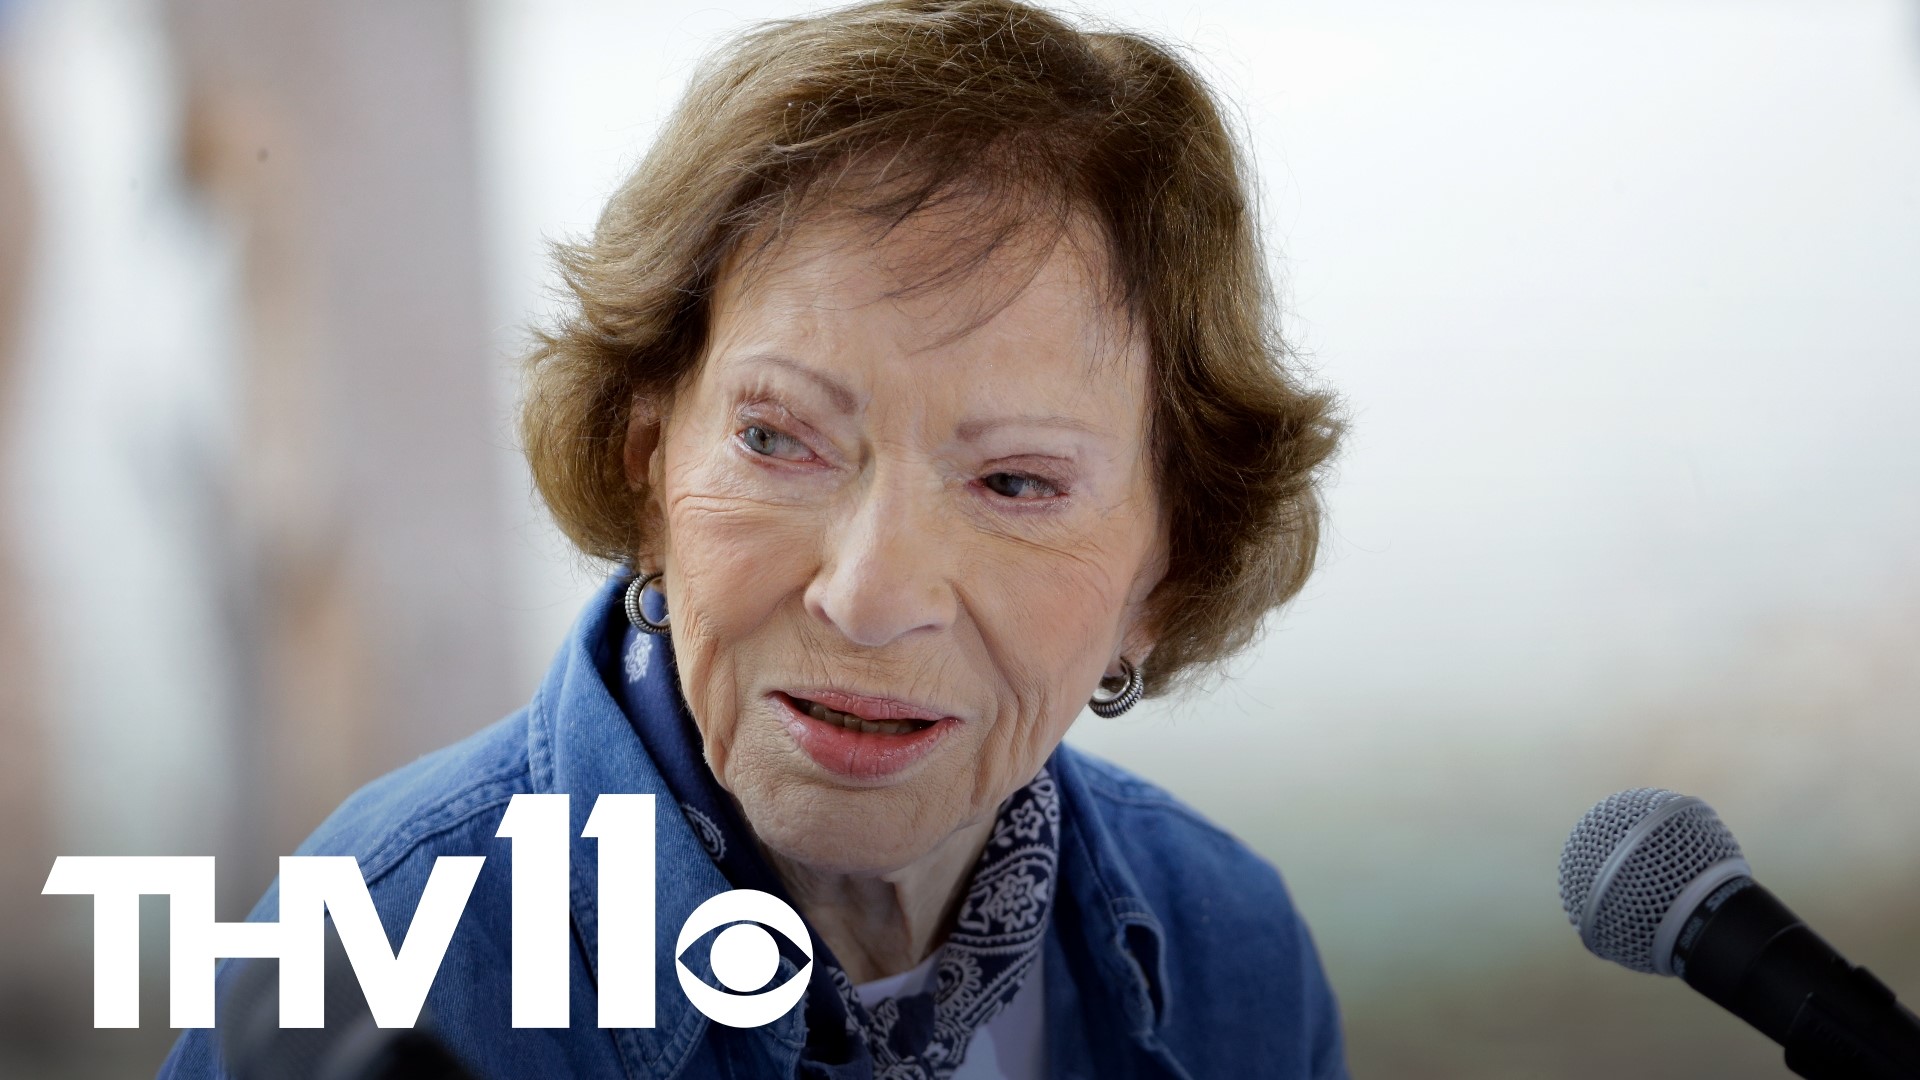 On Tuesday, the family of former first lady Rosalynn Carter revealed that she has been diagnosed with dementia.